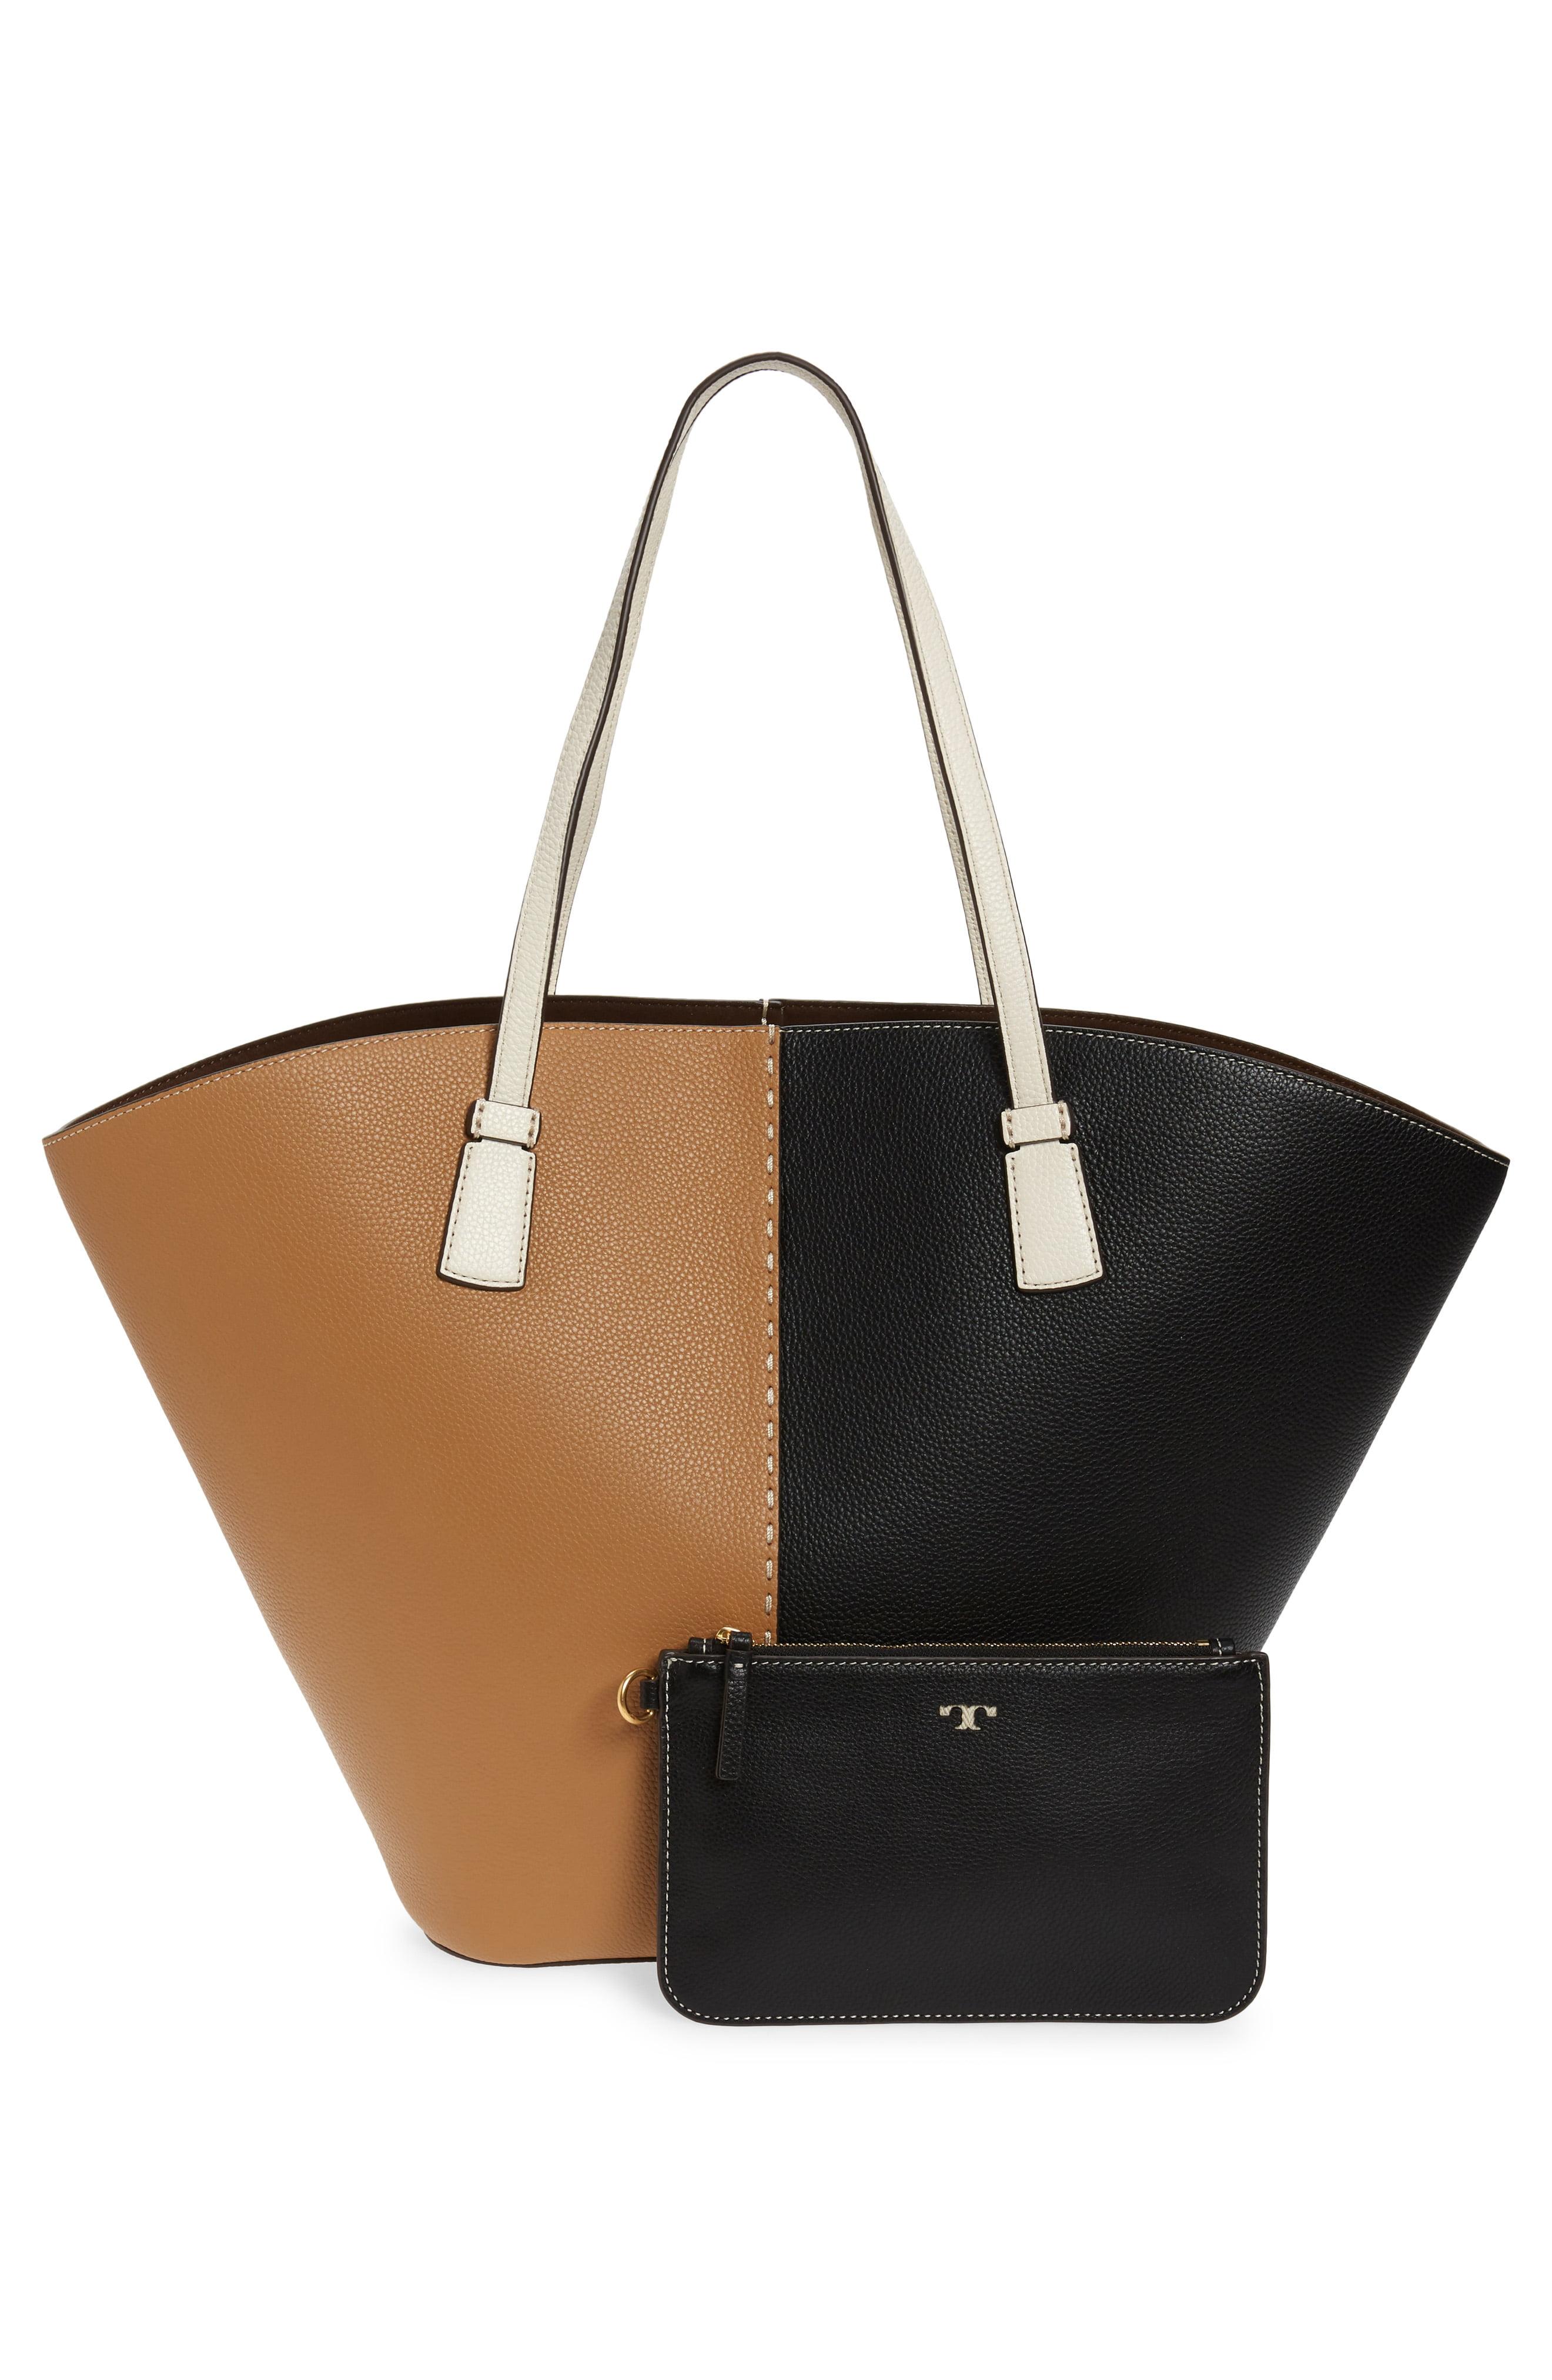 The Shopper-loved Tory Burch McGraw Tote Is 30% Off Right Now